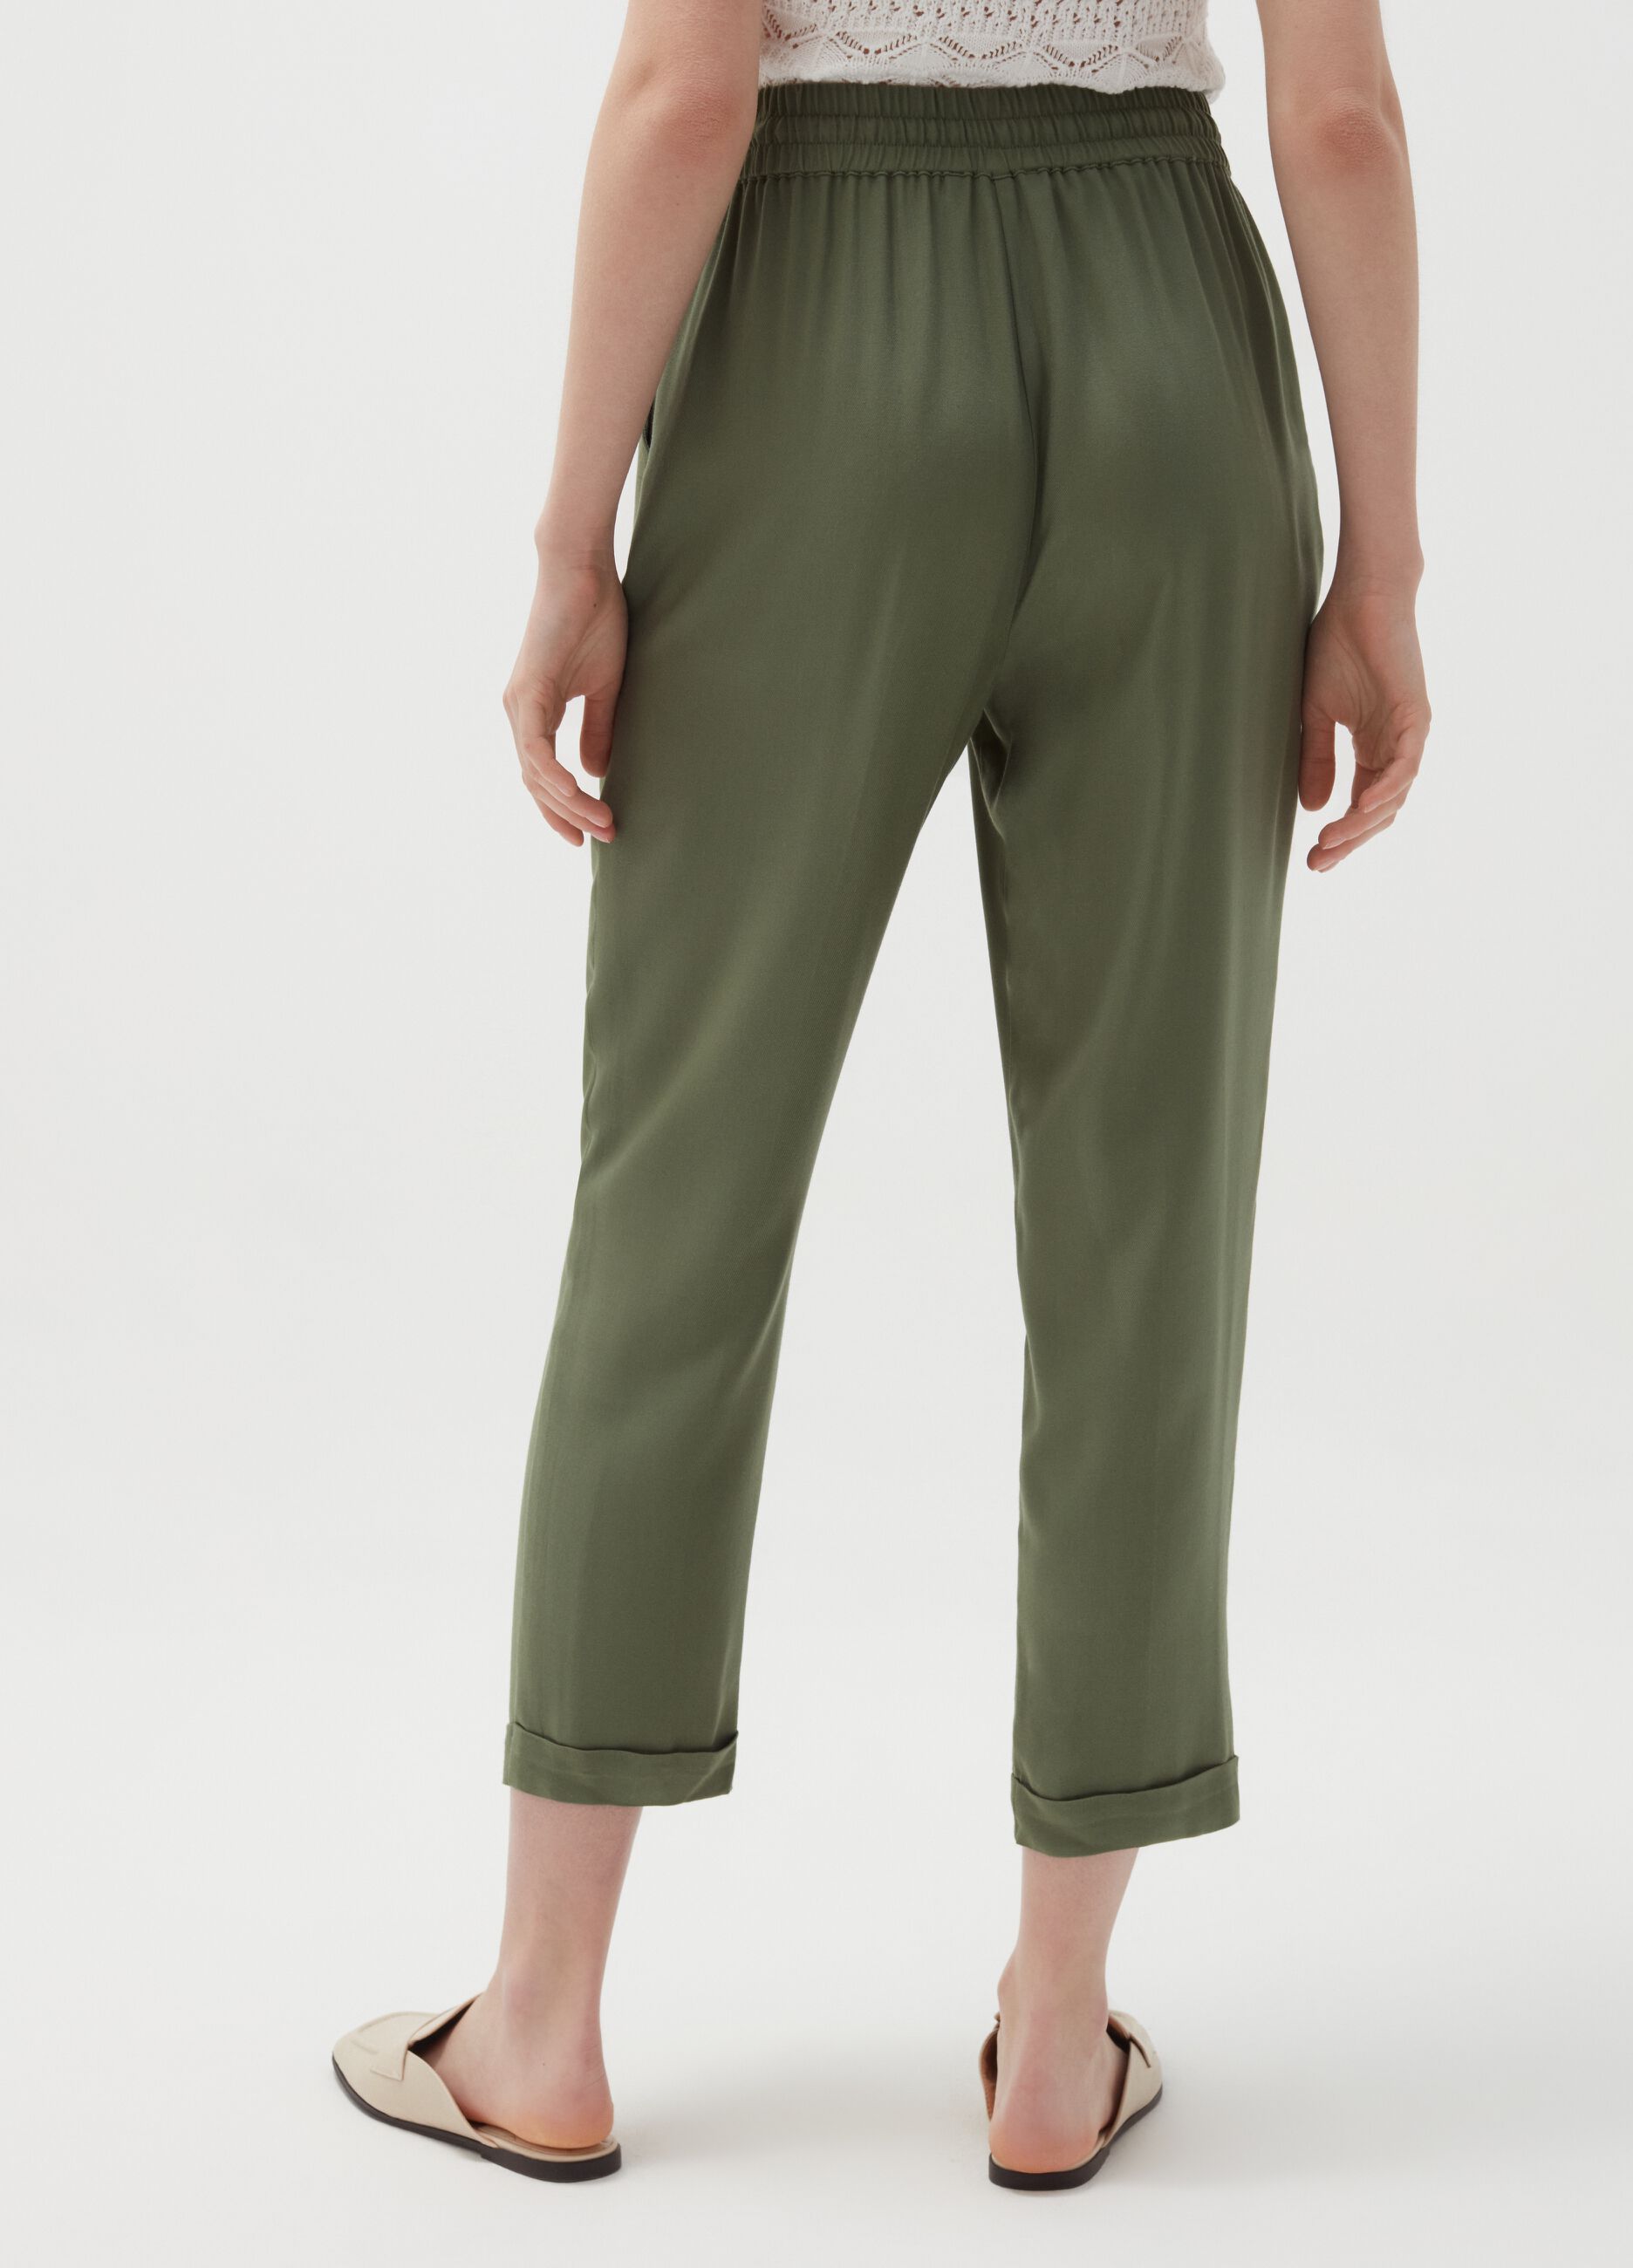 Crop-fit joggers with high drawstring waist.